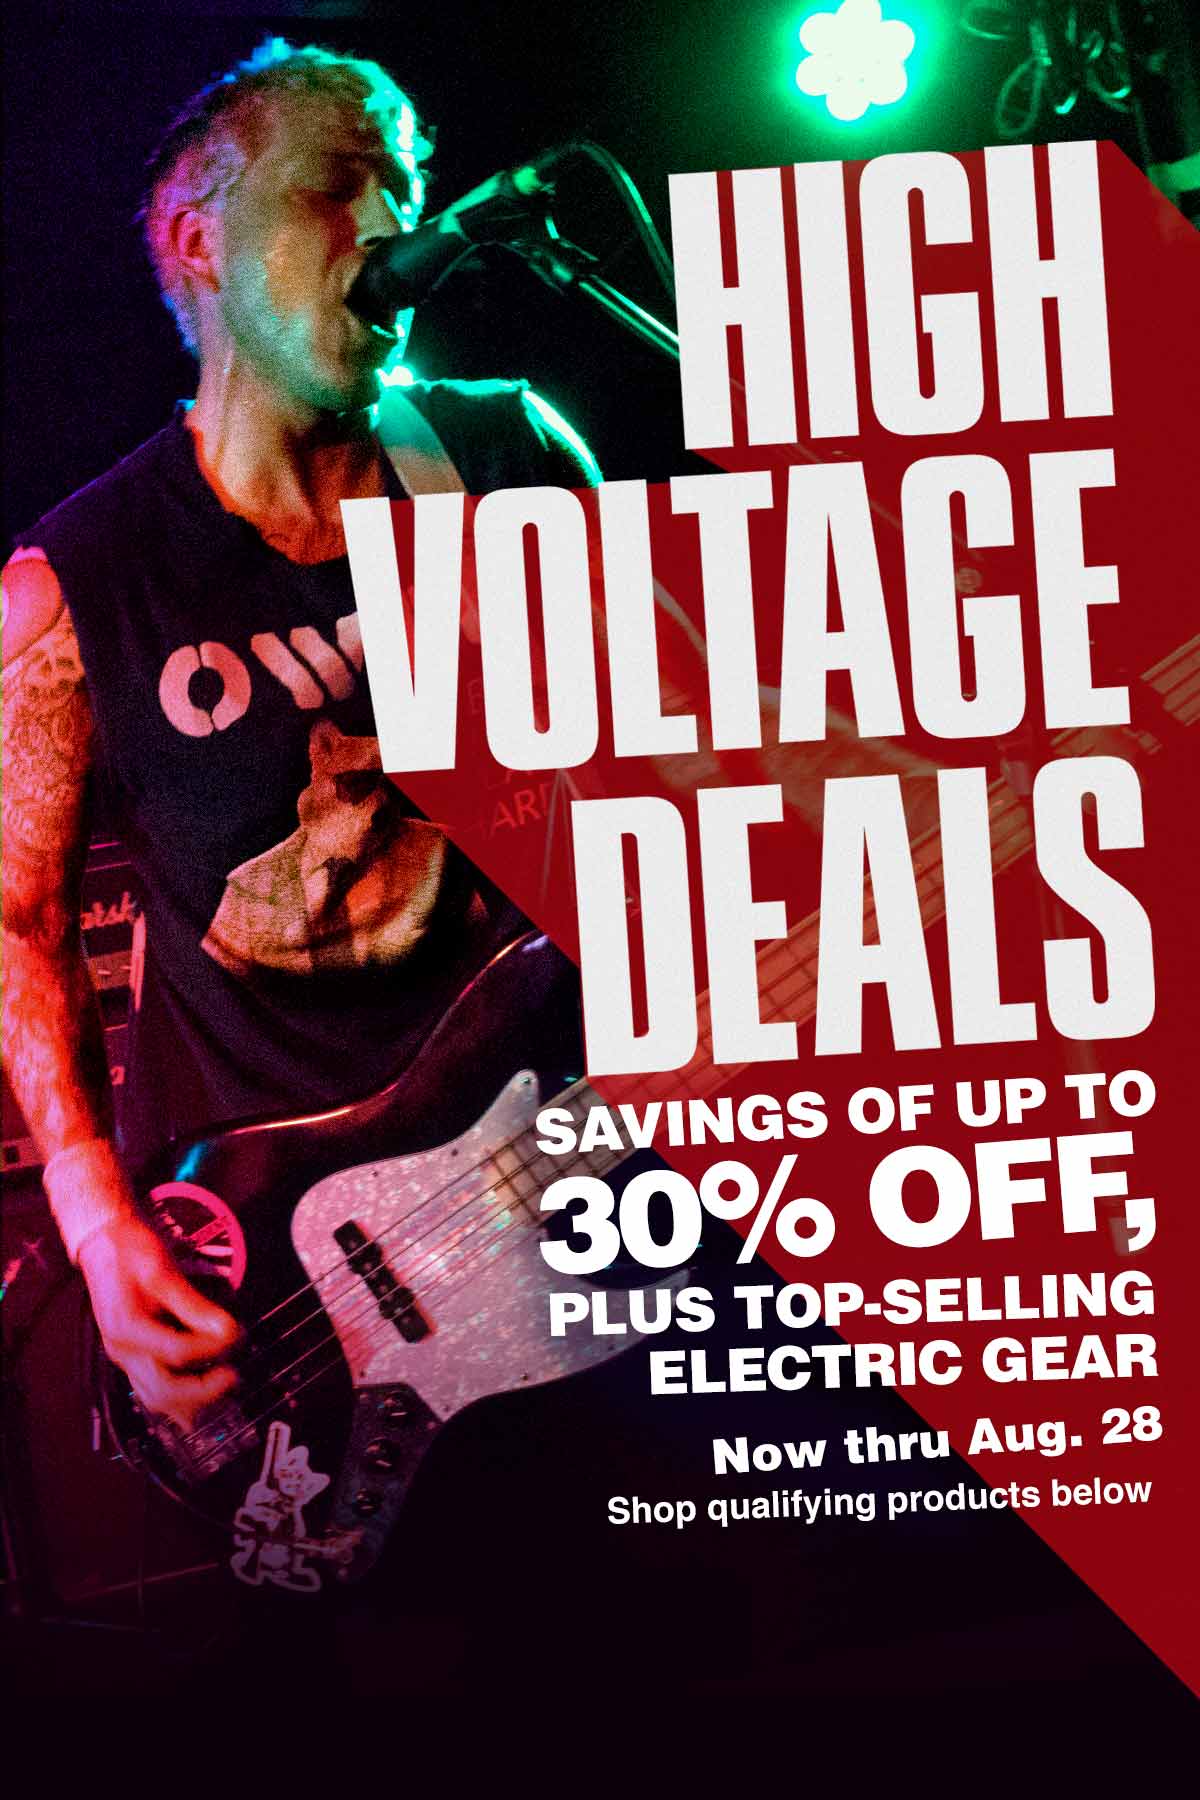 High voltage deals. Savings of up to 30 percent off, plus top-selling electric gear. Now thru August 28. Shop qualifying products below.